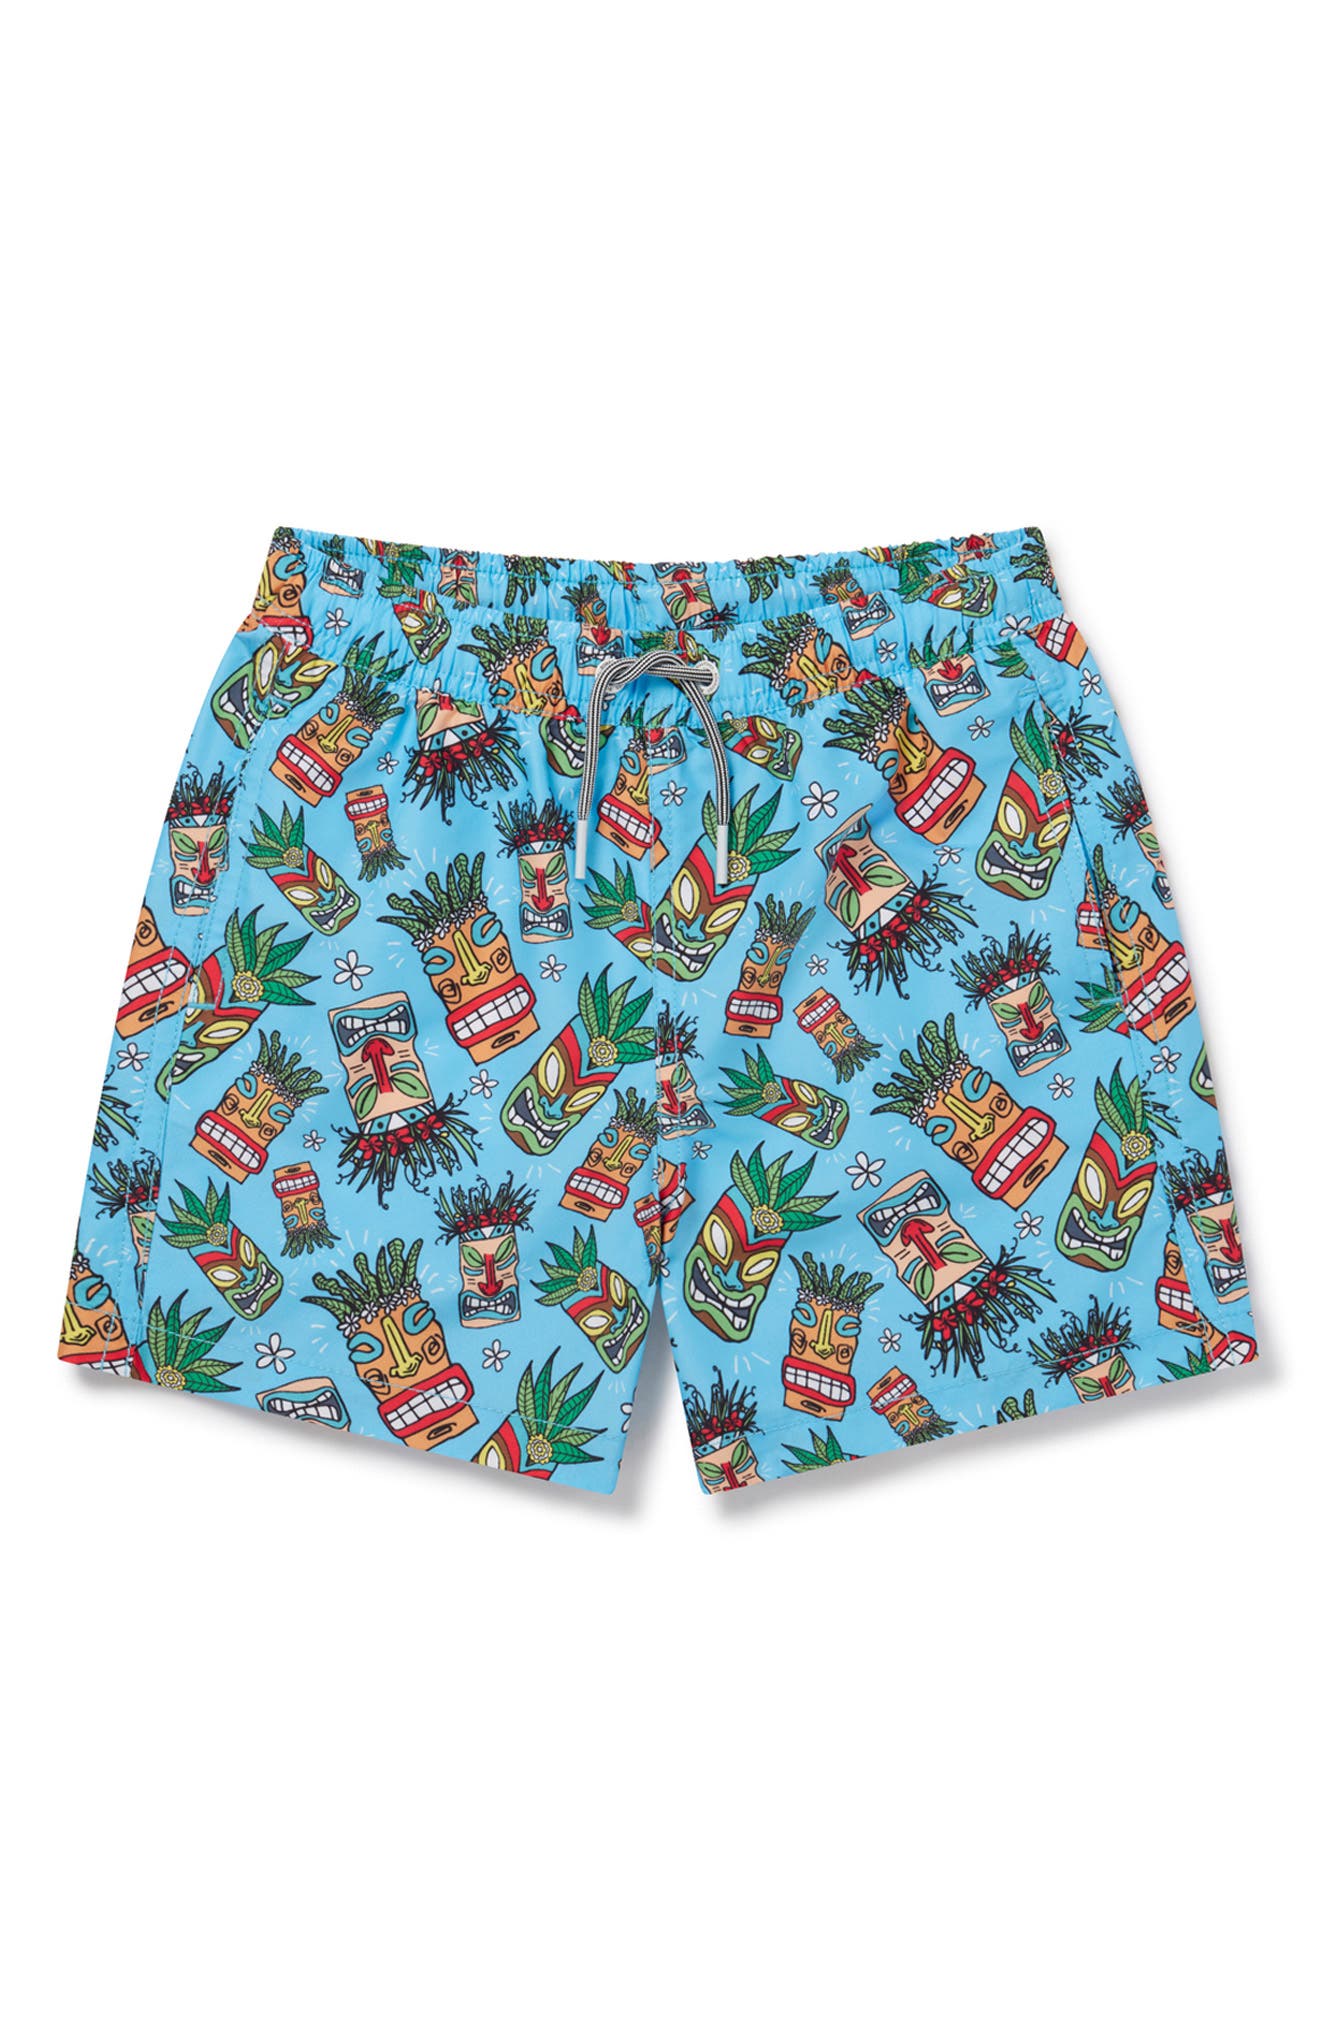 H2O Dinosaur Print Younger Boys and Babies Swimming Trunks 